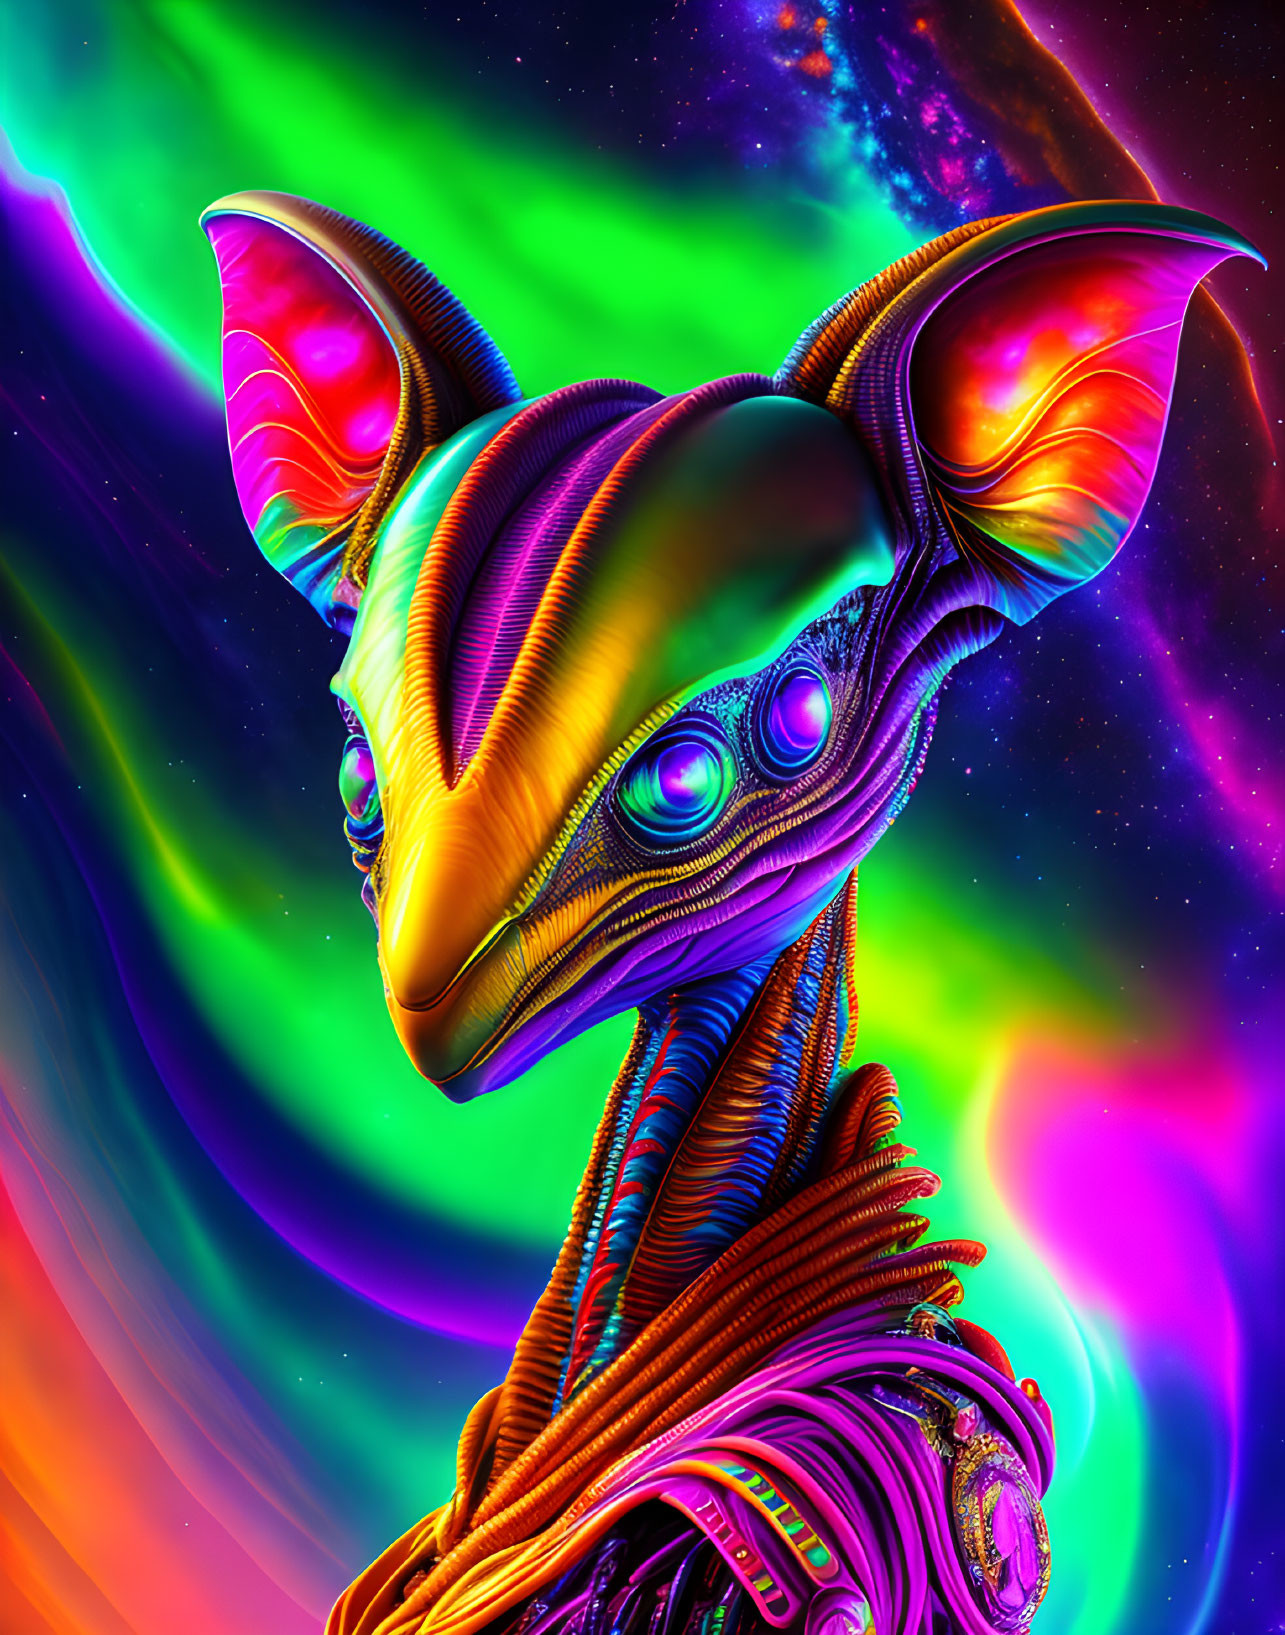 Colorful digital artwork of an alien creature in a psychedelic nebula.